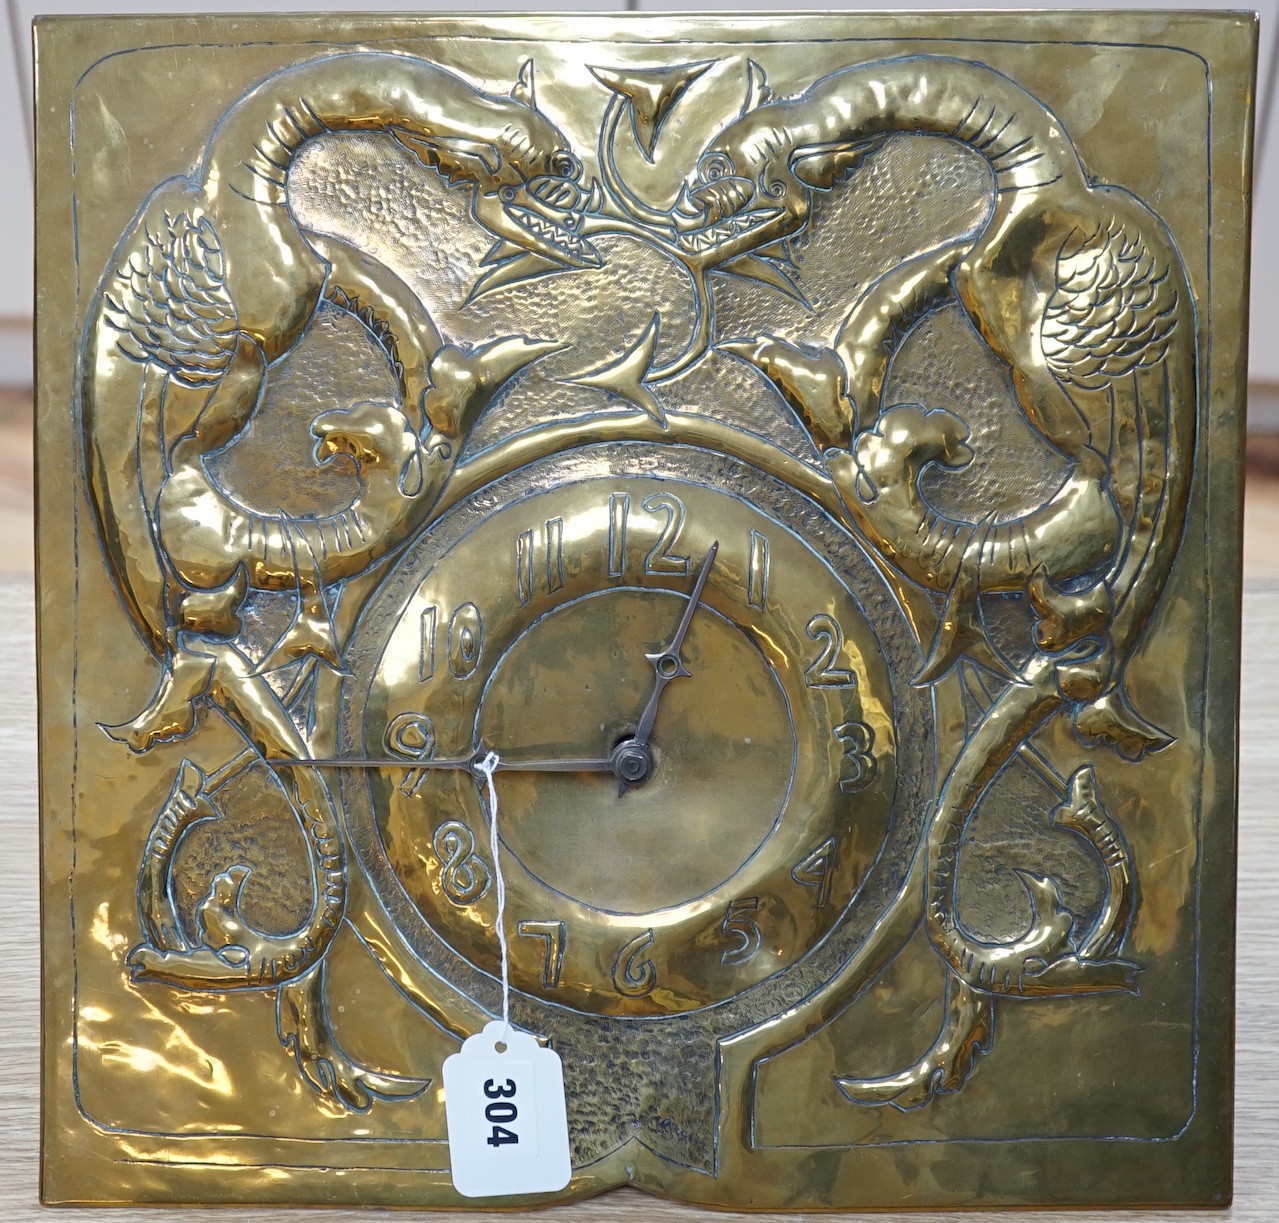 An early 20th Century Arts & Crafts/Art Nouveau brass wall clock in the manner of Margaret Gilmour, Glasgow School with embossed weights and pendulum, dial 37x37cm, Black Forest type movement